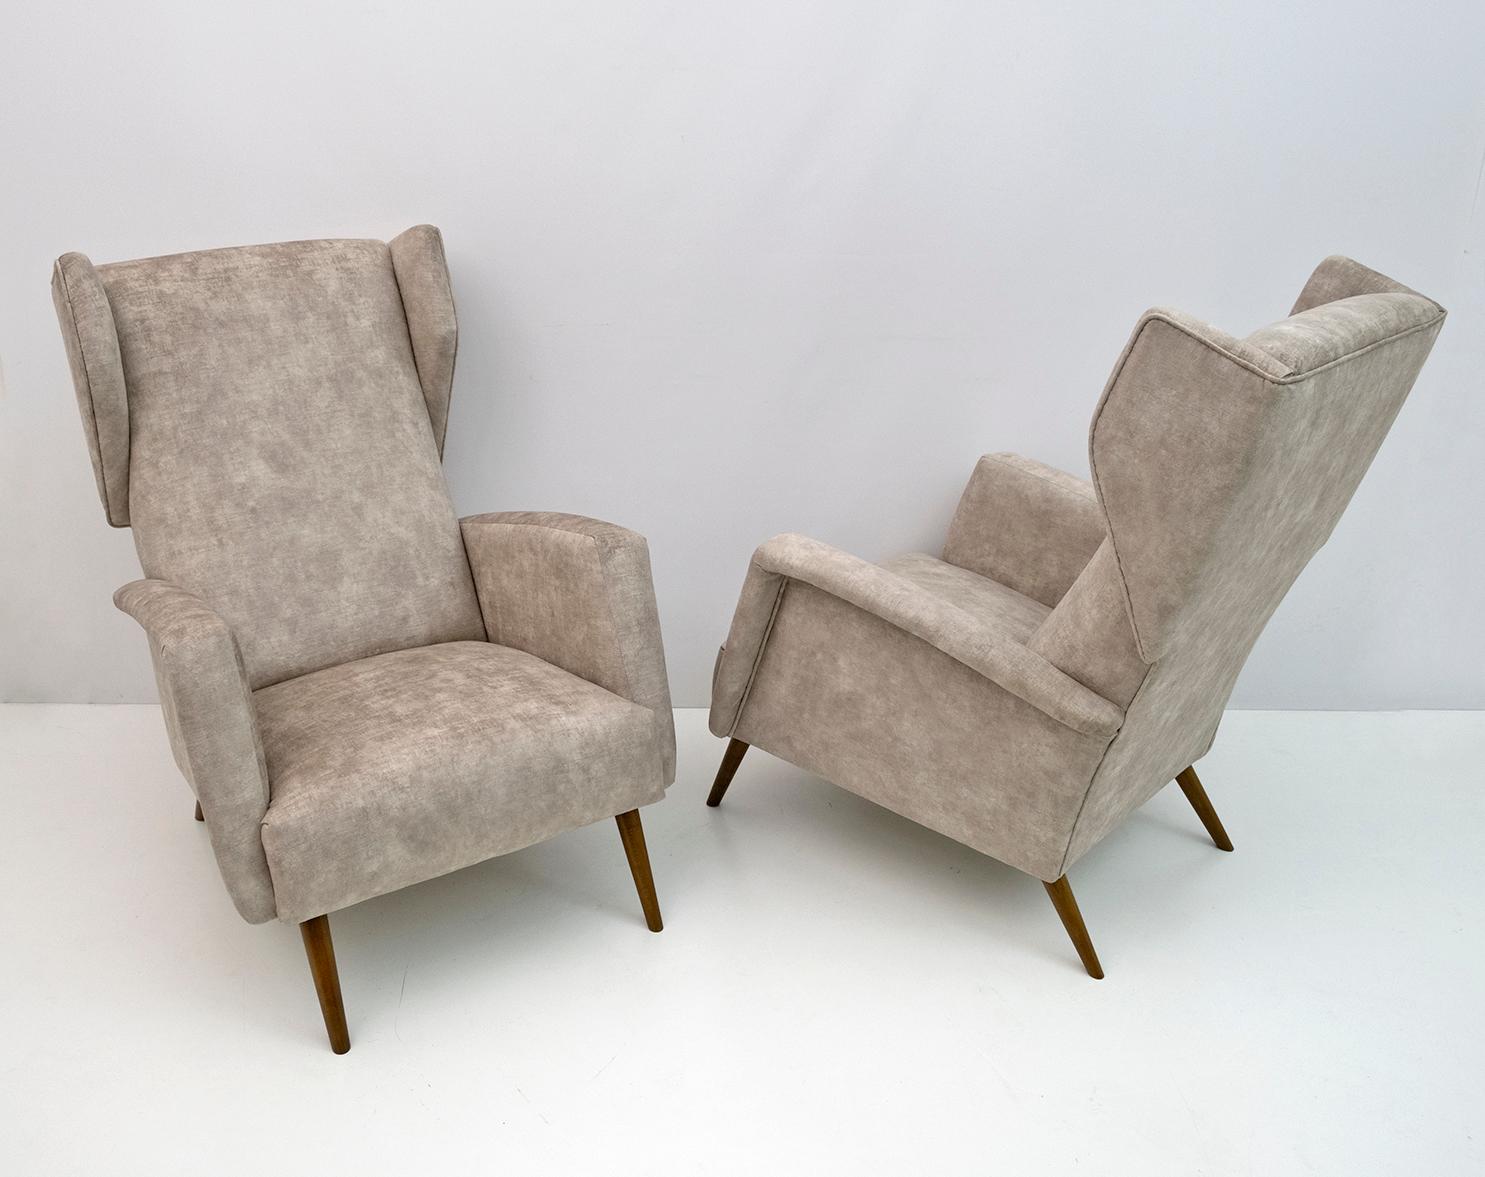 Pair of bergère armchairs, Alata Mod. 820 armchairs, designed by Gio Ponti for the Royal Hotel in Naples and produced by Cassina, Italy, 1950. Completely restored and recently upholstered in vintage ivory velvet.